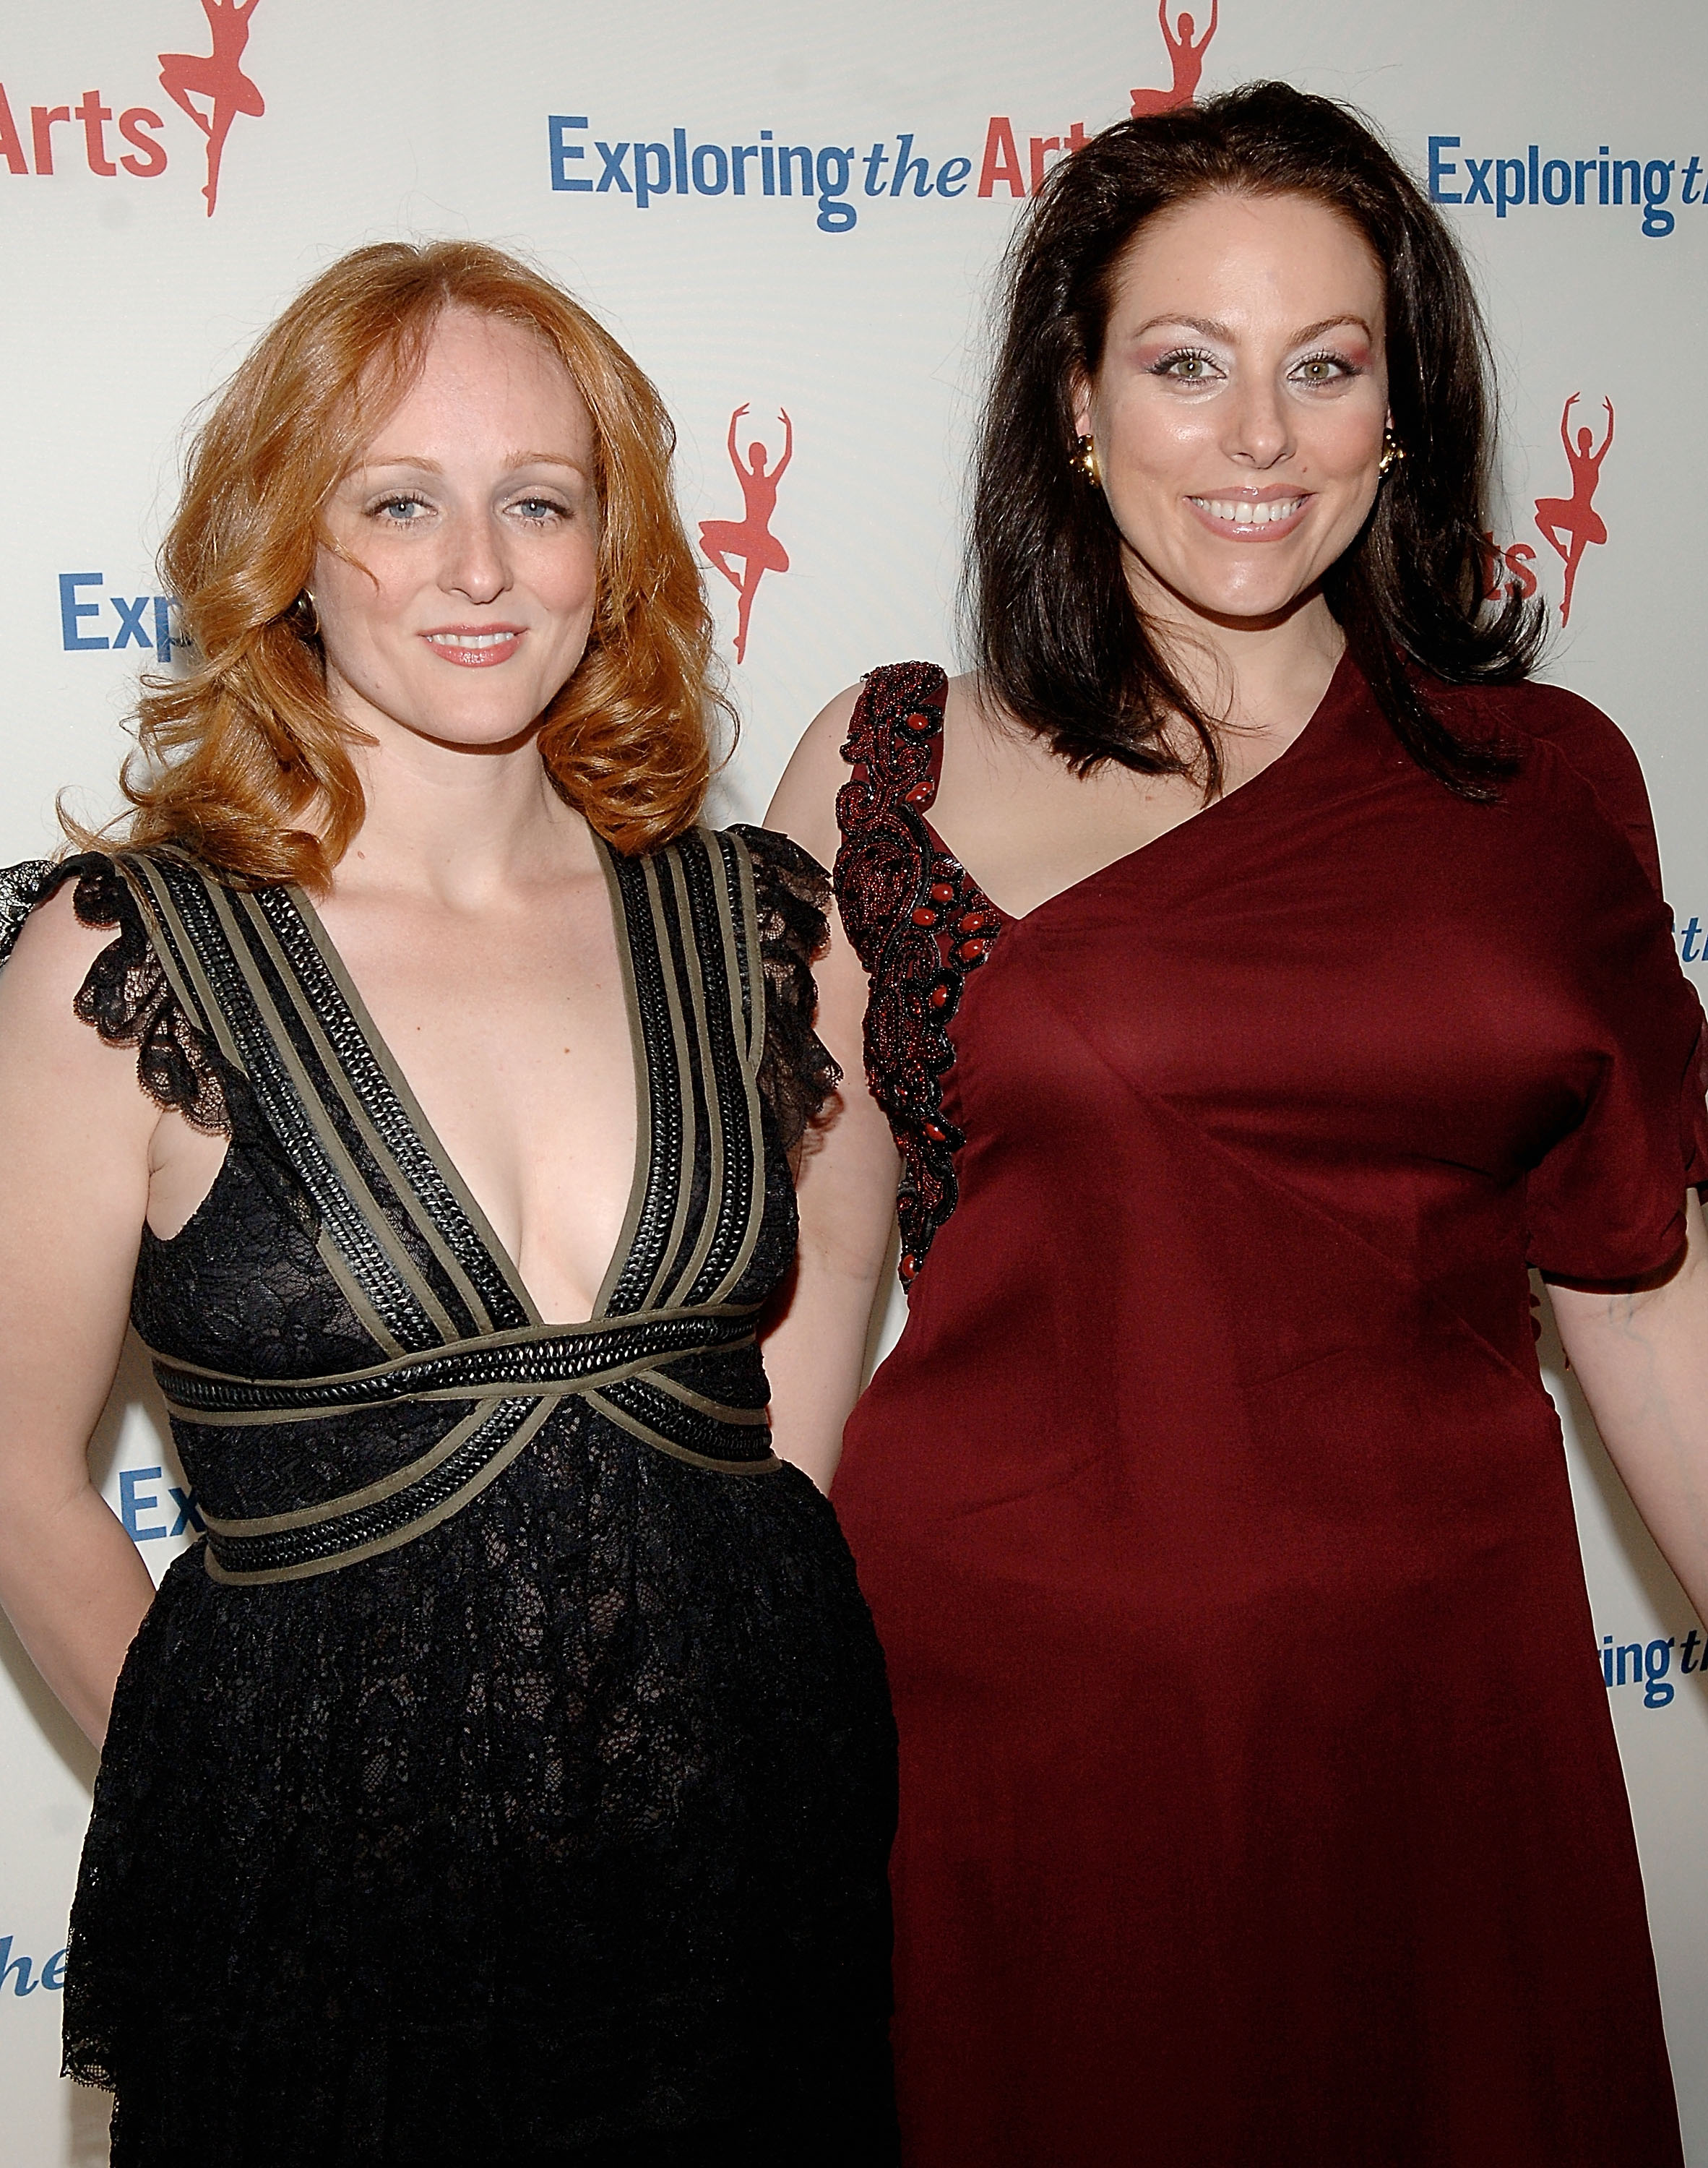 Antonia and Joanna Bennett at the Susan and Tony Bennett's "Exploring the Arts" Gala on September 23, 2008, in New York City. | Source: Getty Images